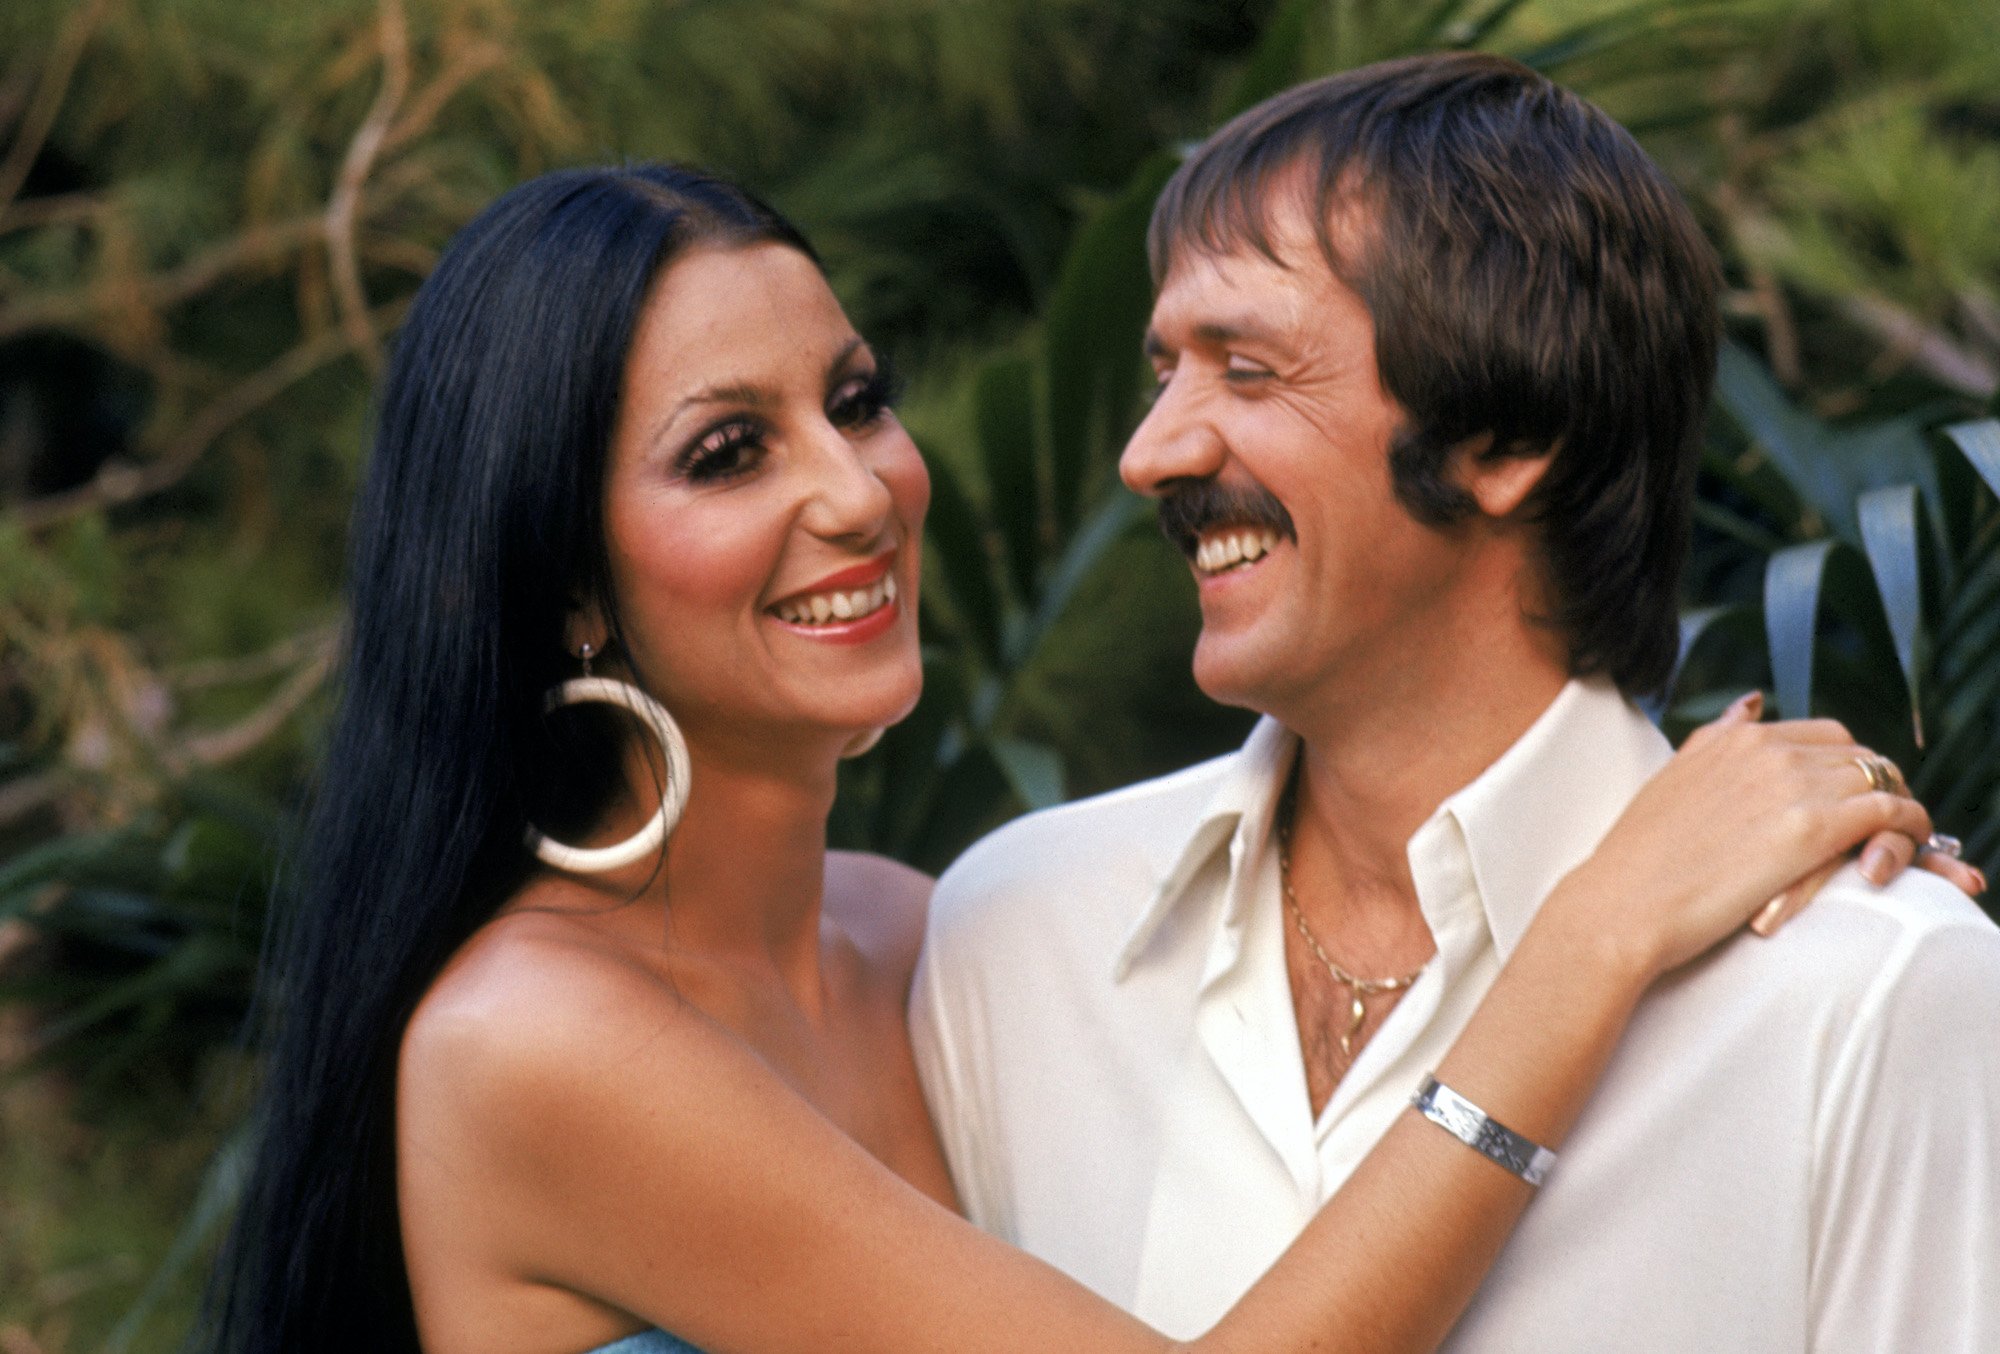 Cher Says Her Relationship With Sonny Bono Fell Apart Because He Was A Huge Womanizer